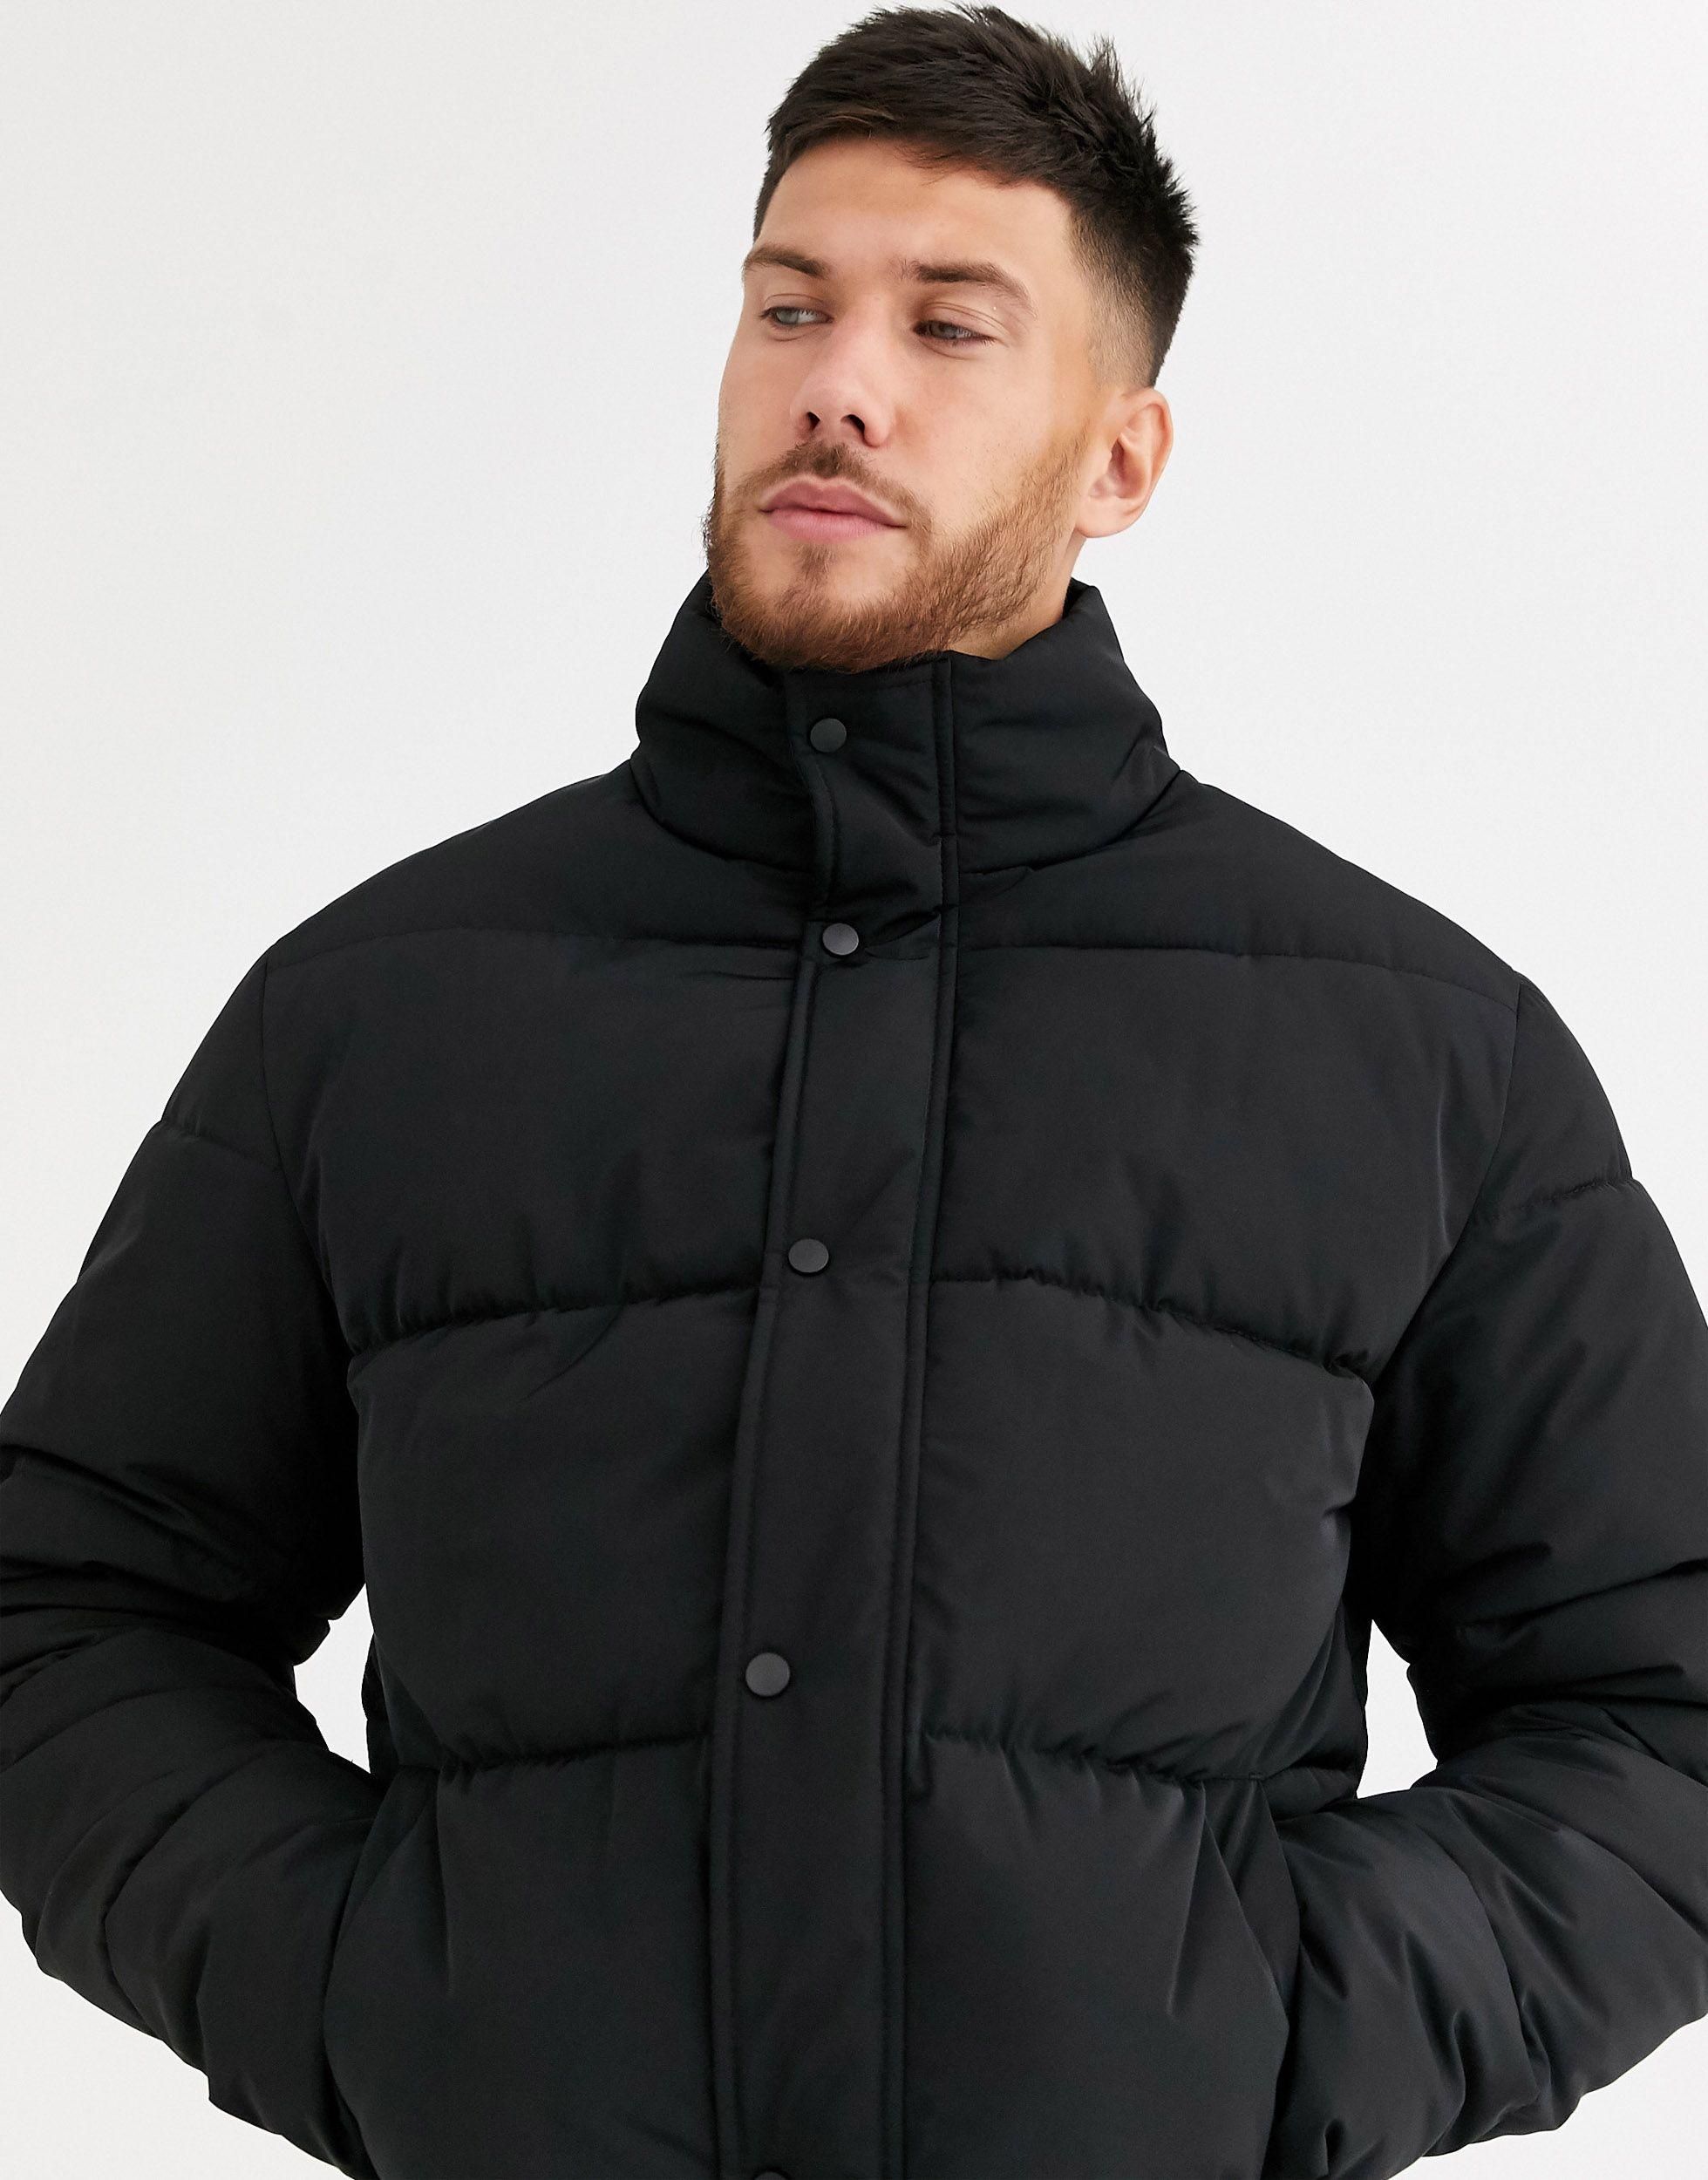 ASOS Synthetic Sustainable Puffer Jacket in Black for Men - Lyst